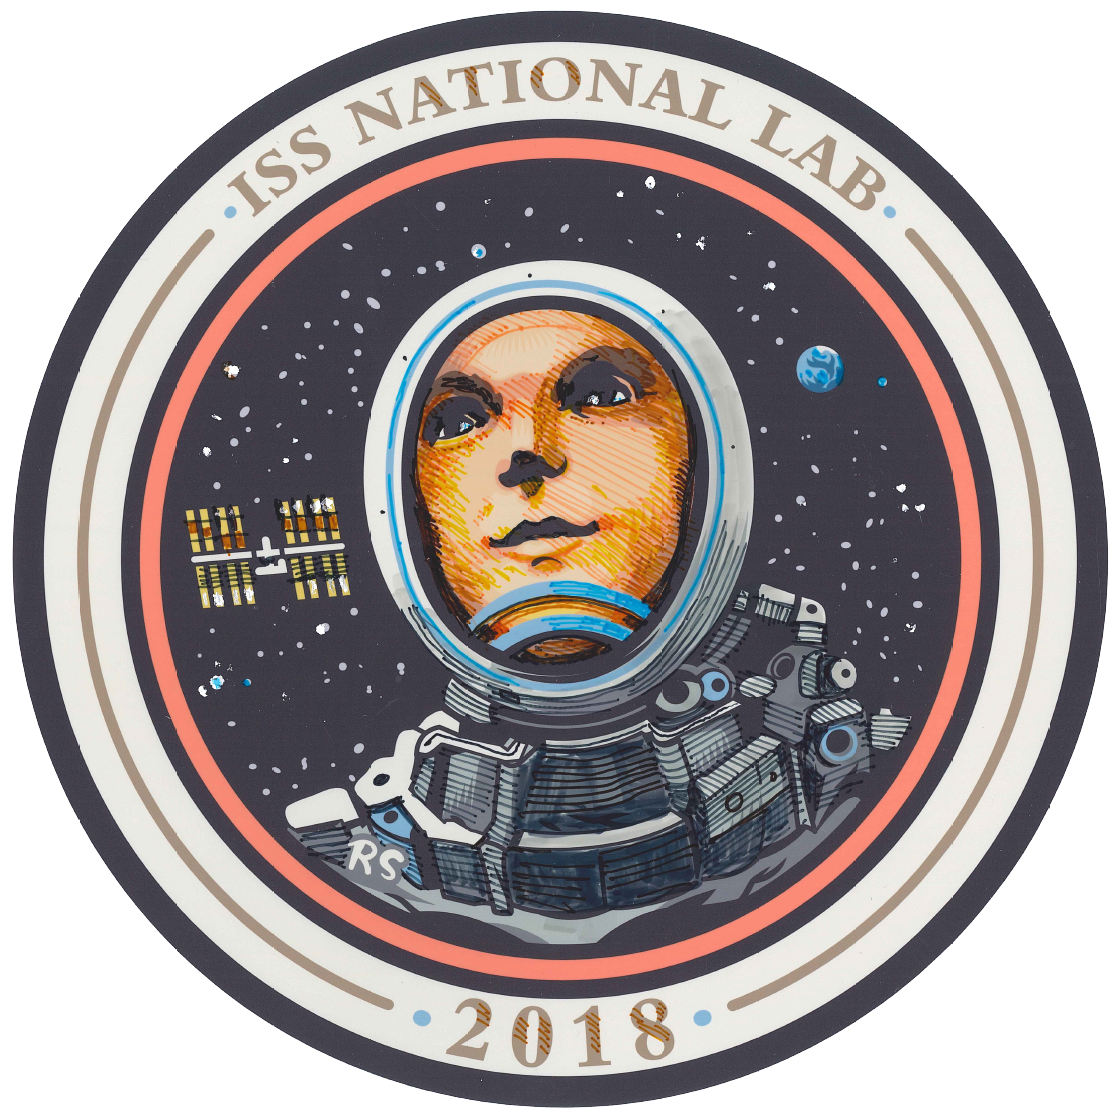 ISS U.S. National Lab Patch